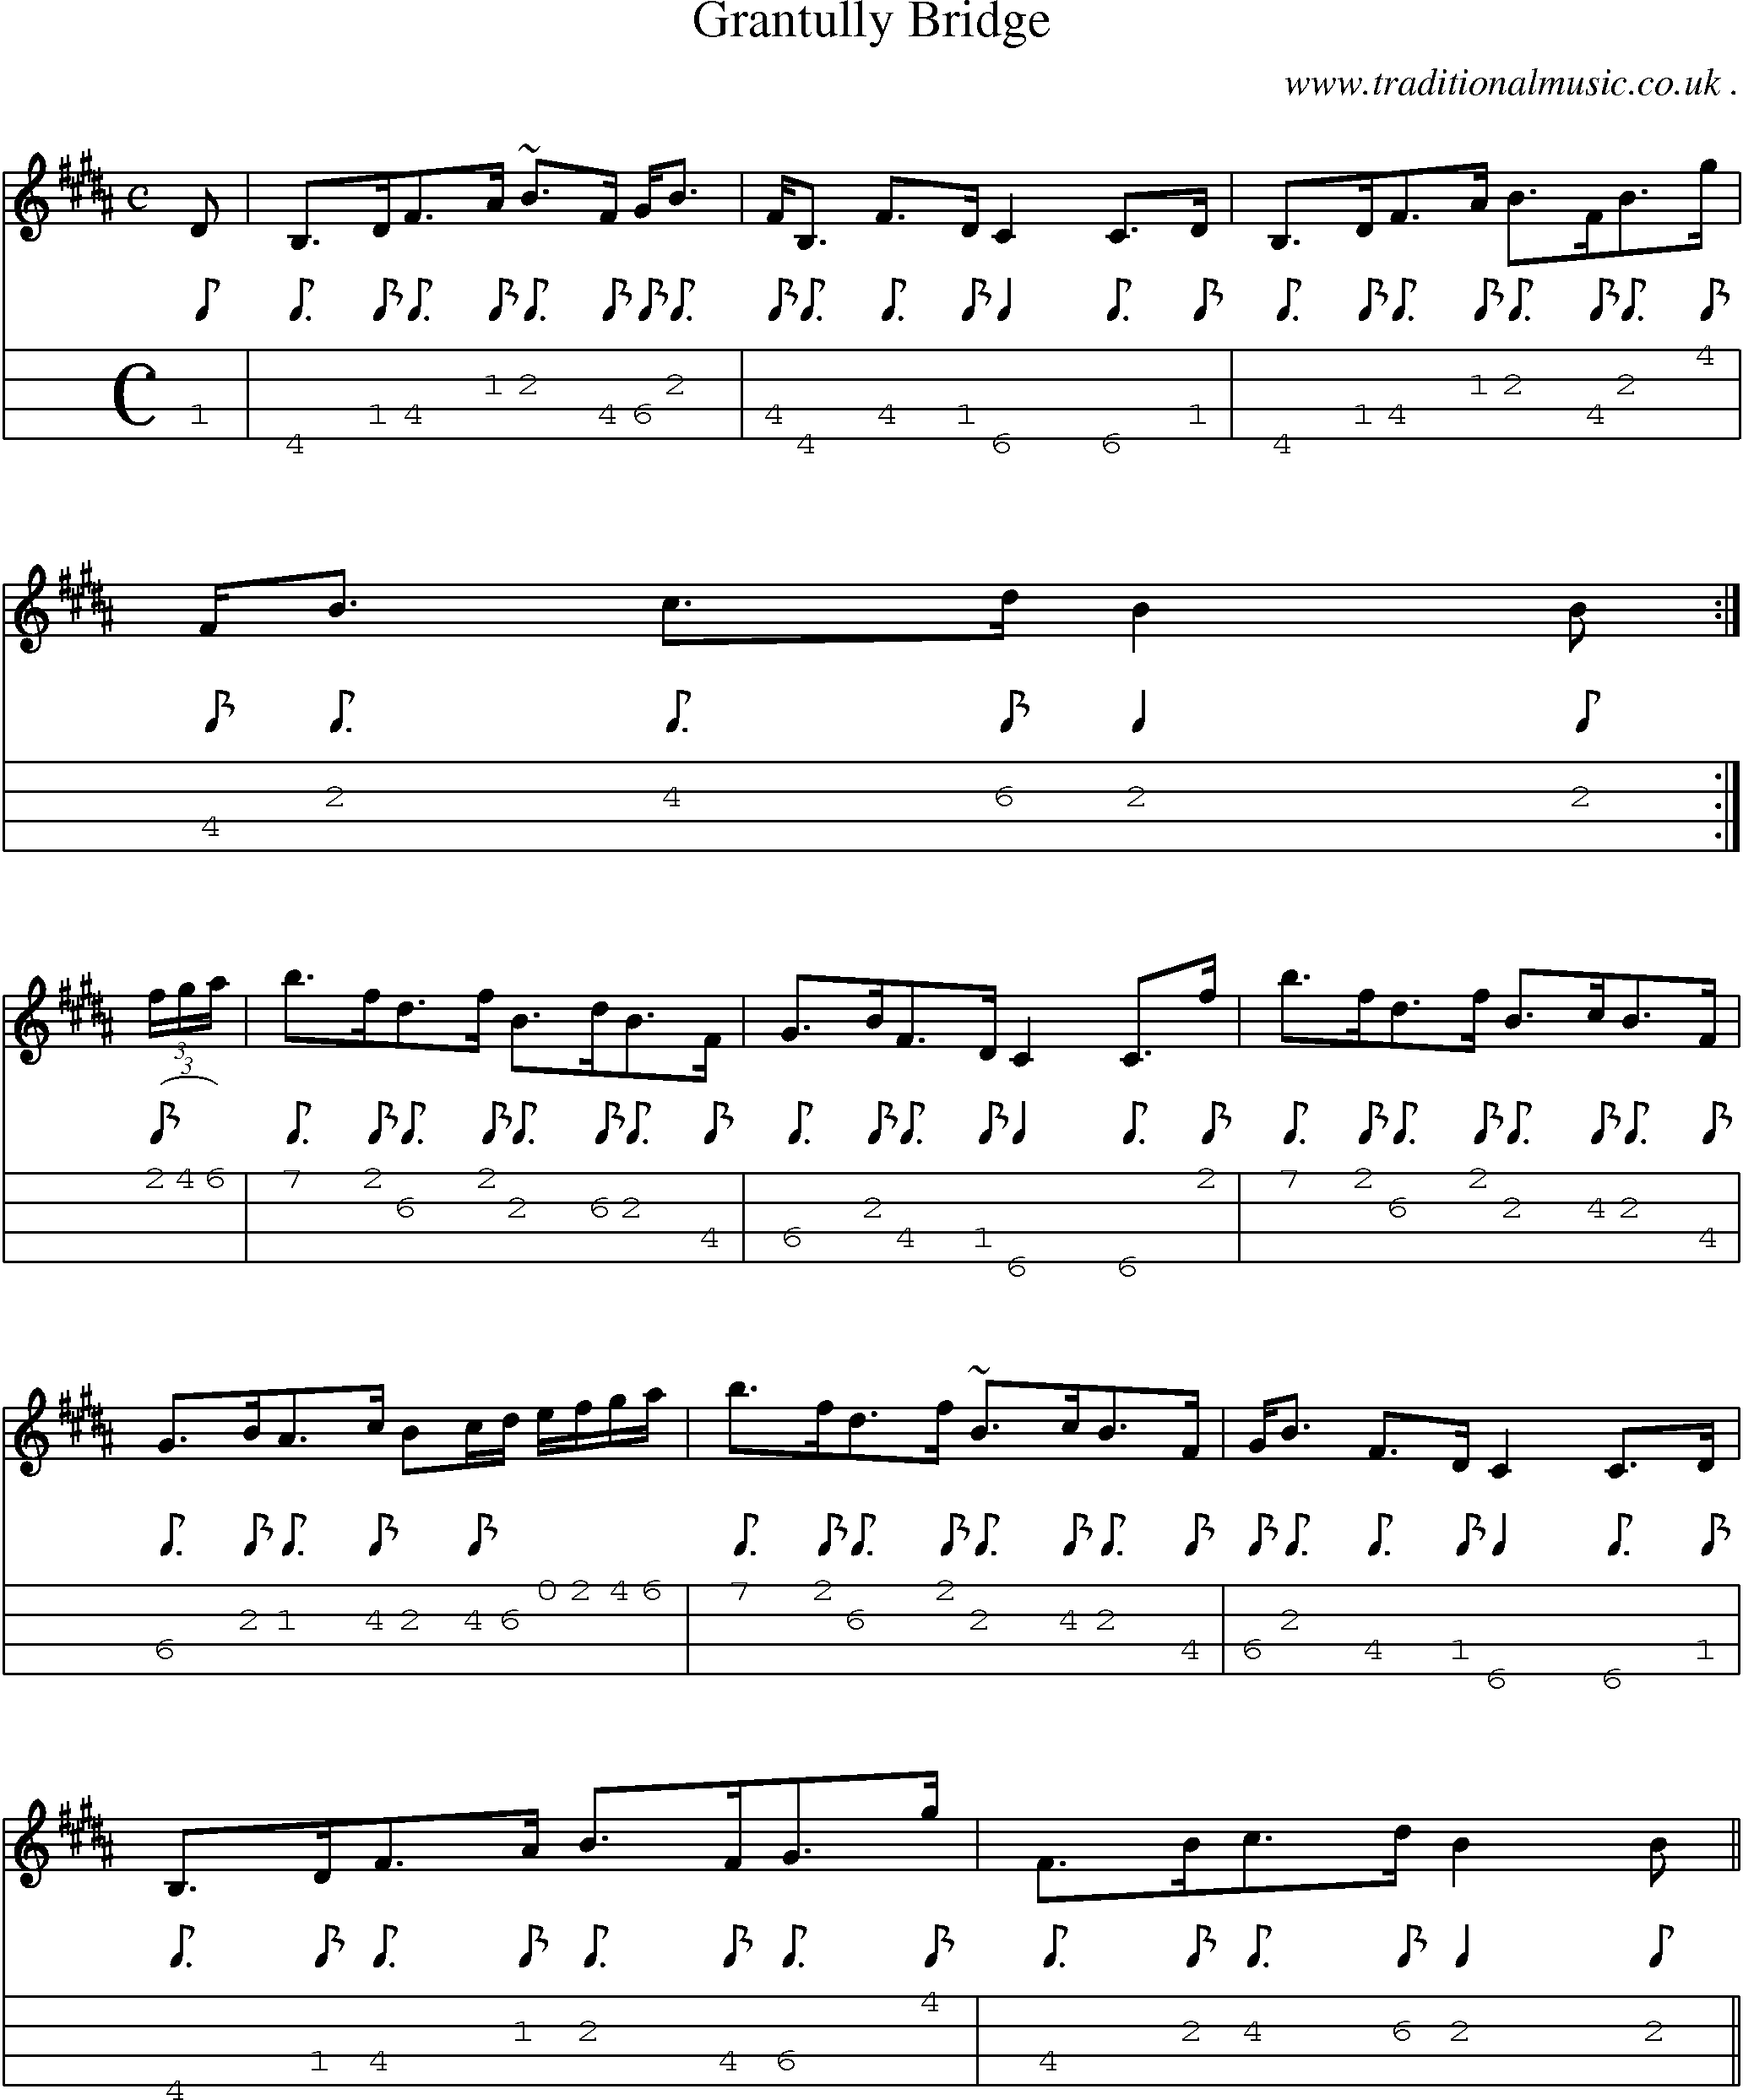 Sheet-music  score, Chords and Mandolin Tabs for Grantully Bridge